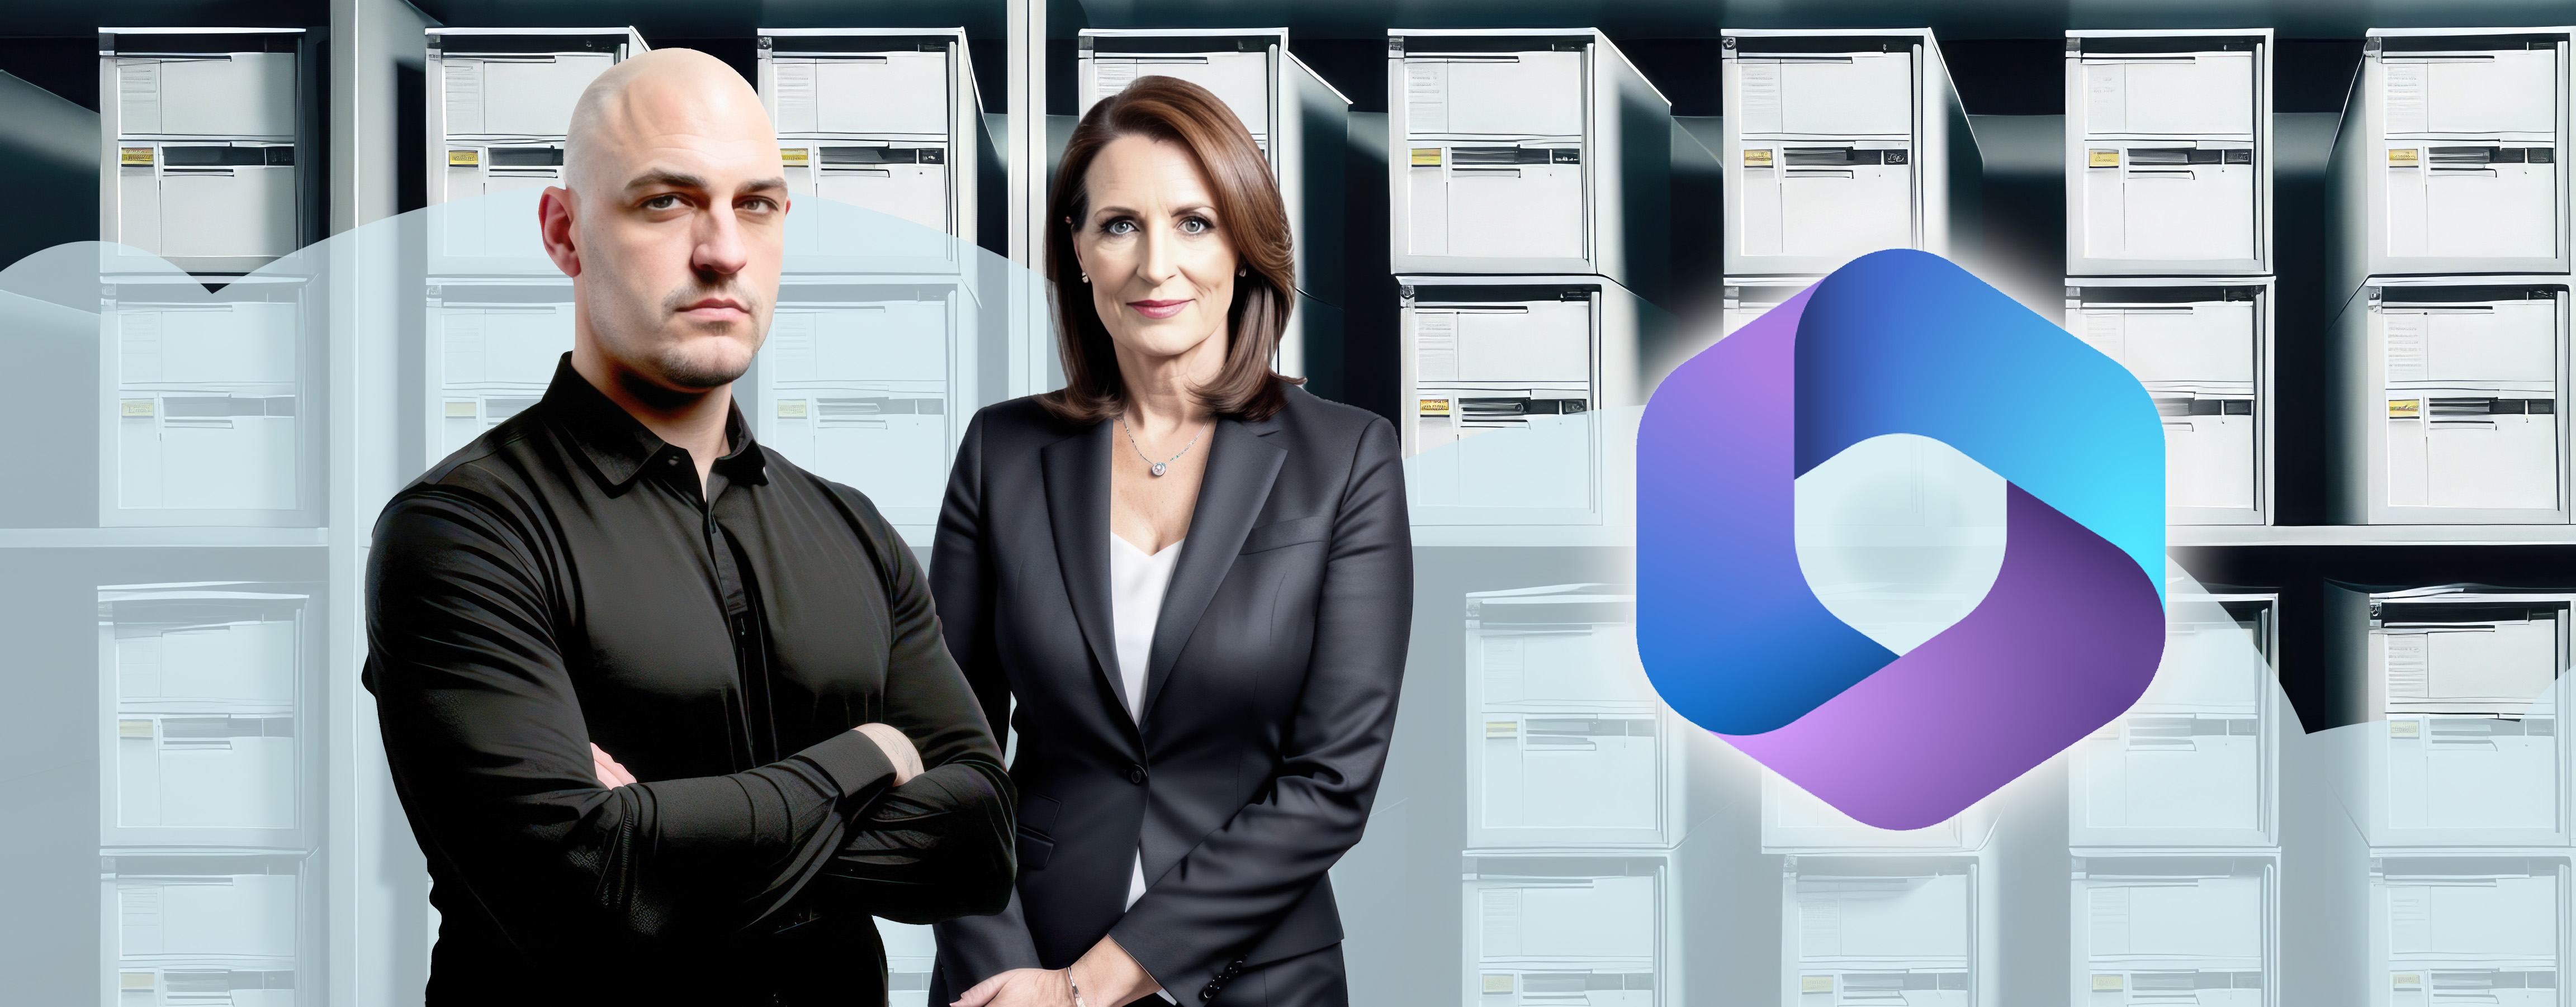 Two people standing in front of filing cabinets